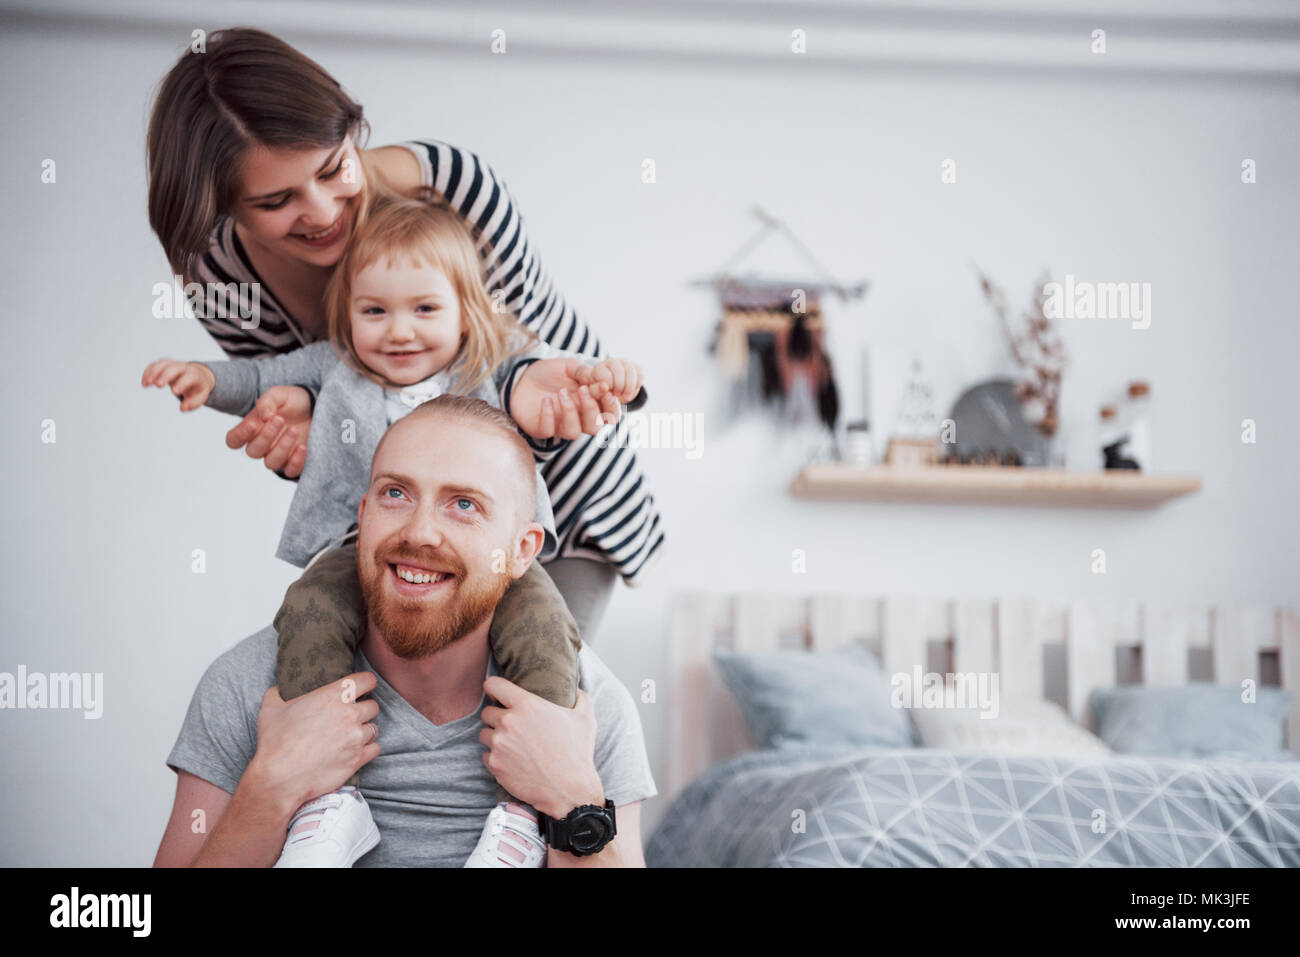 happy family mother, father, child daughter at home Stock Photo